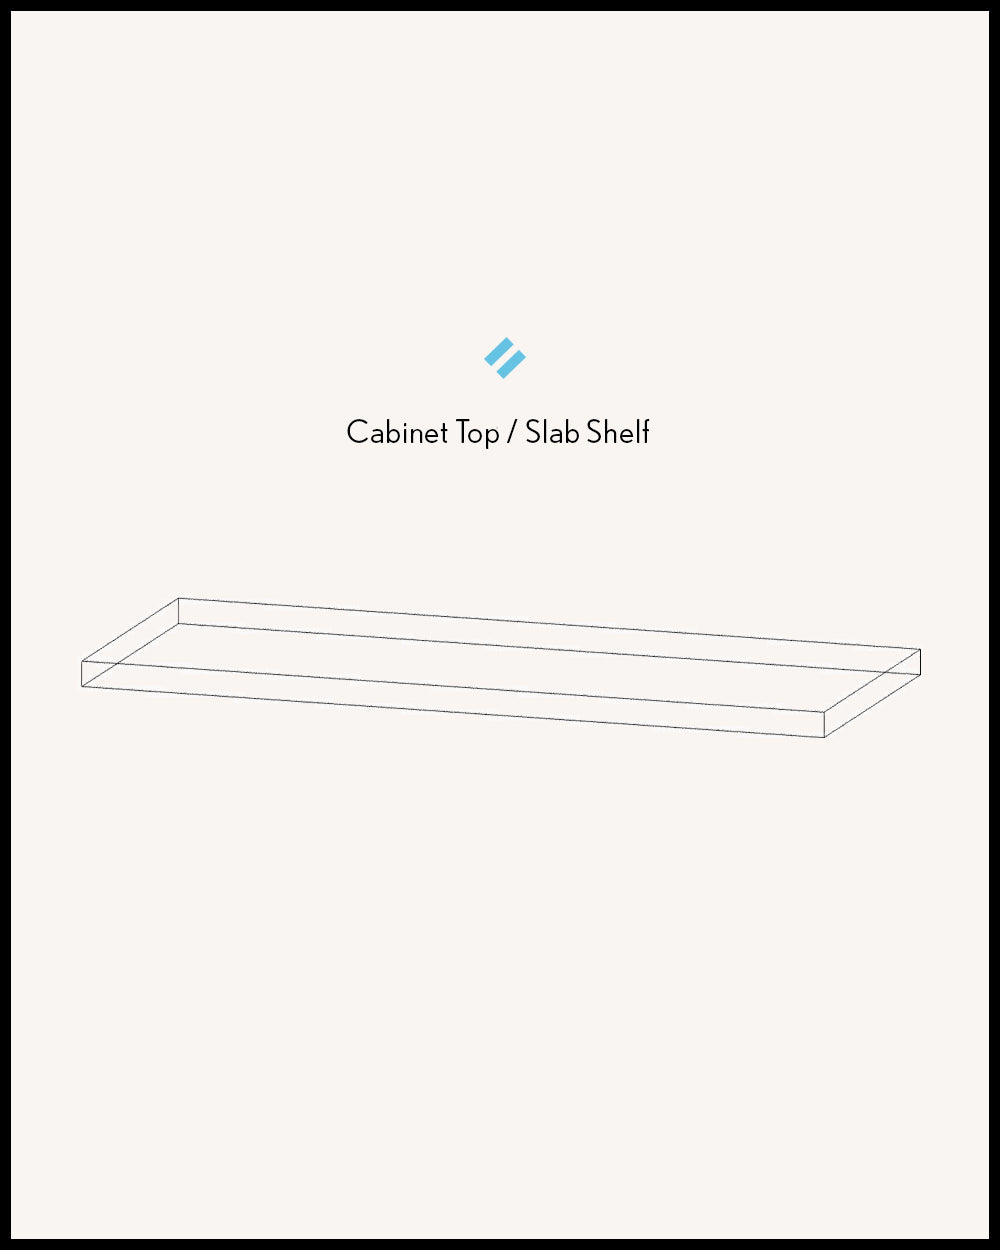 Bamboo 4.1-6" thick Cabinet Top / Slab Shelf